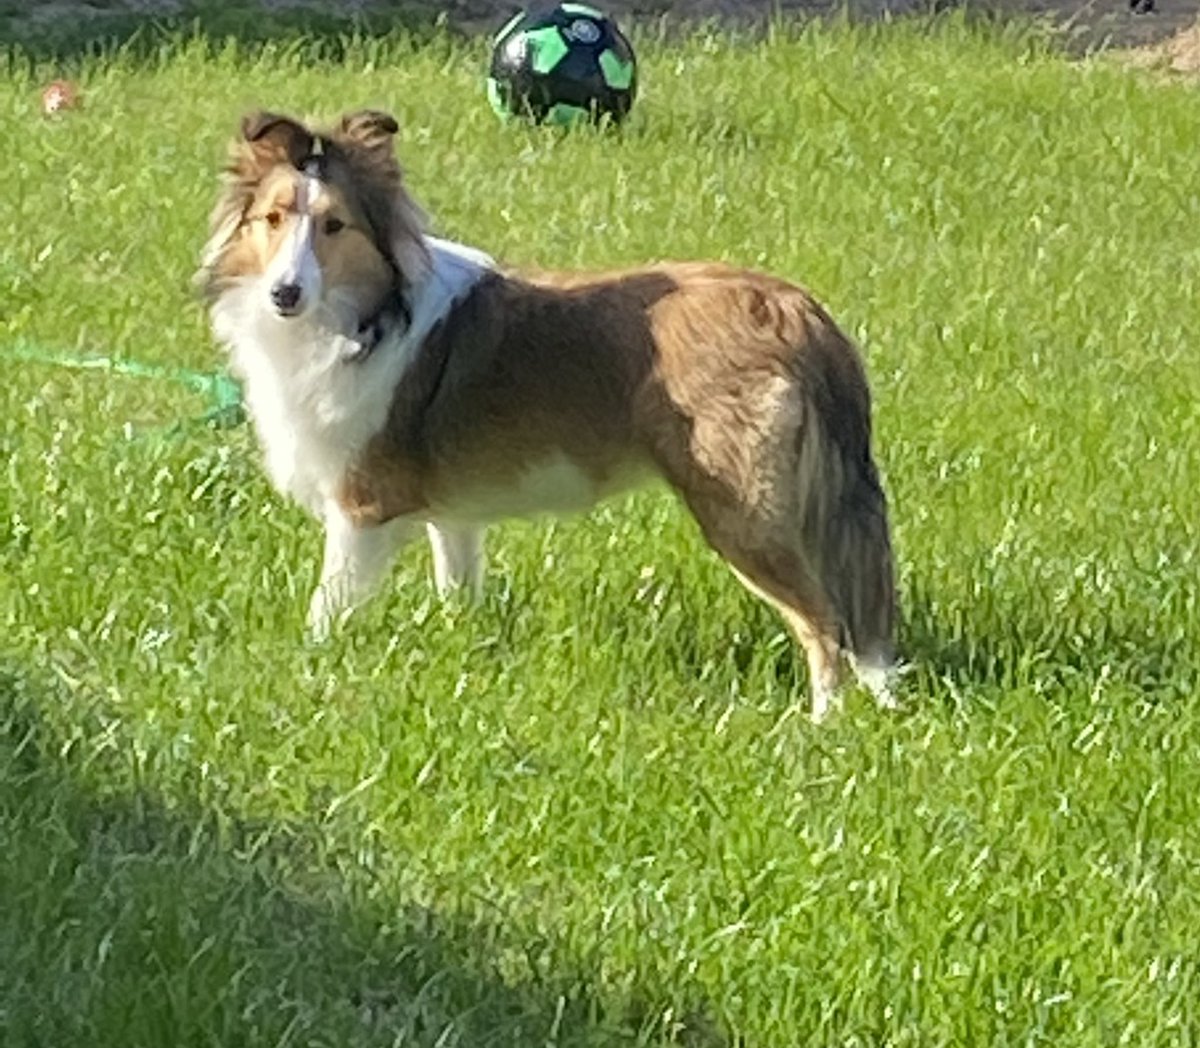 @DonTonyD She is a Scottish Sheltie, from the Shetland Islands, super smart, and the queen of the household, Lol😂 #SkylarBomb